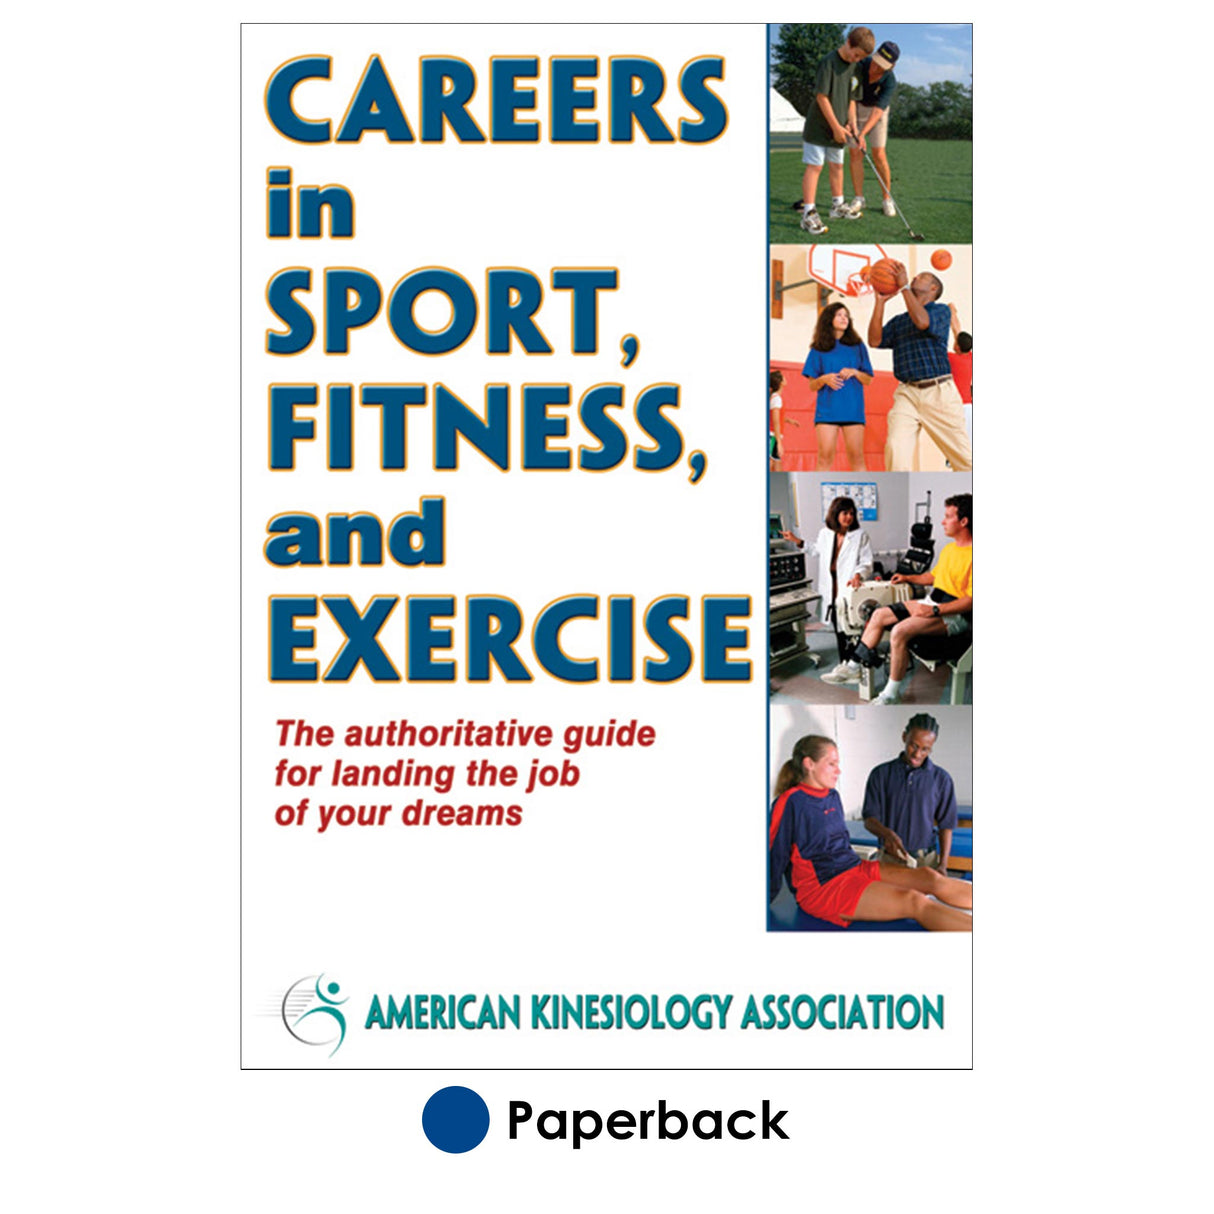 Careers in Sport, Fitness, and Exercise